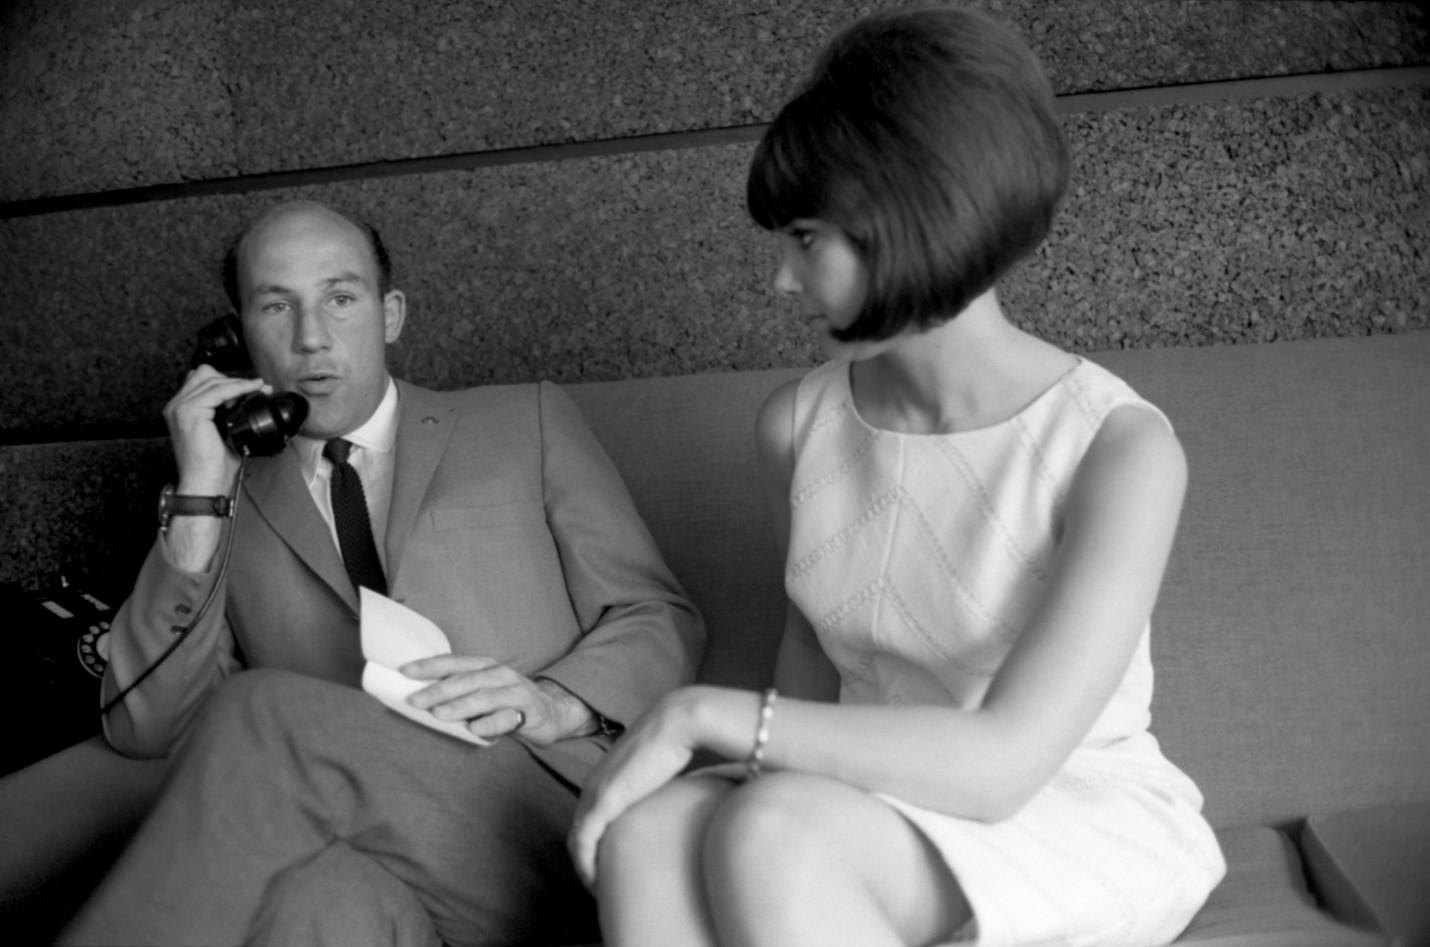 In 1964 Stirling Moss and his American wife Elaine Barberino sit on a sofa together – Stirling speaks on a telephone whilst Elaine looks at him. Elaine has a perfect beehive hairstyle and they are both dressed fashionably.